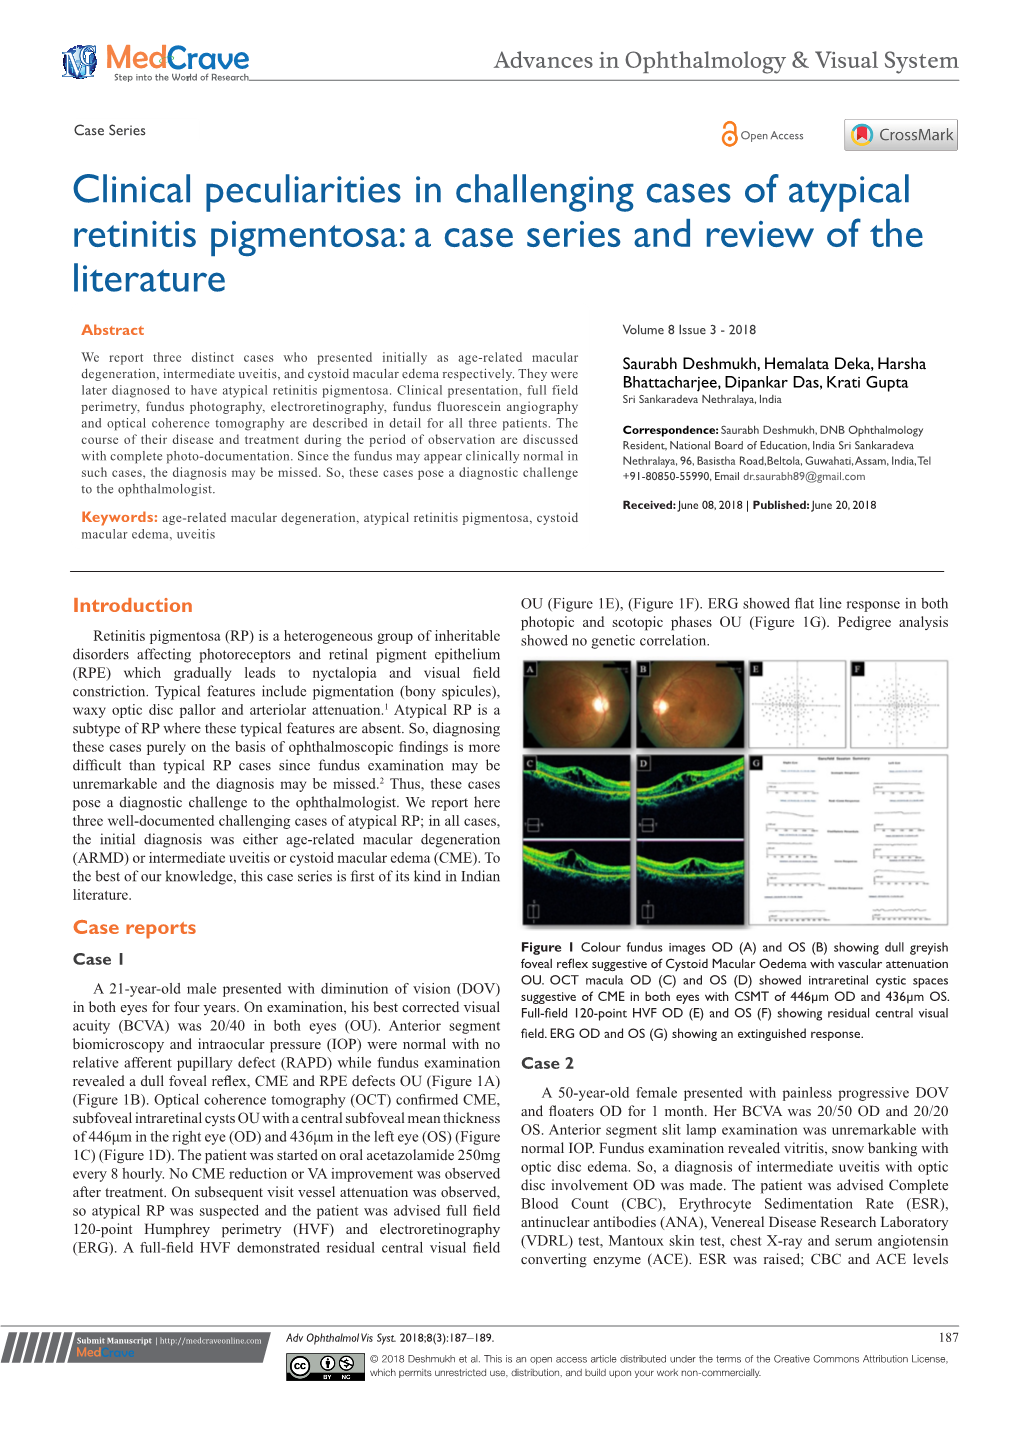 Clinical Peculiarities in Challenging Cases of Atypical Retinitis Pigmentosa: a Case Series and Review of the Literature